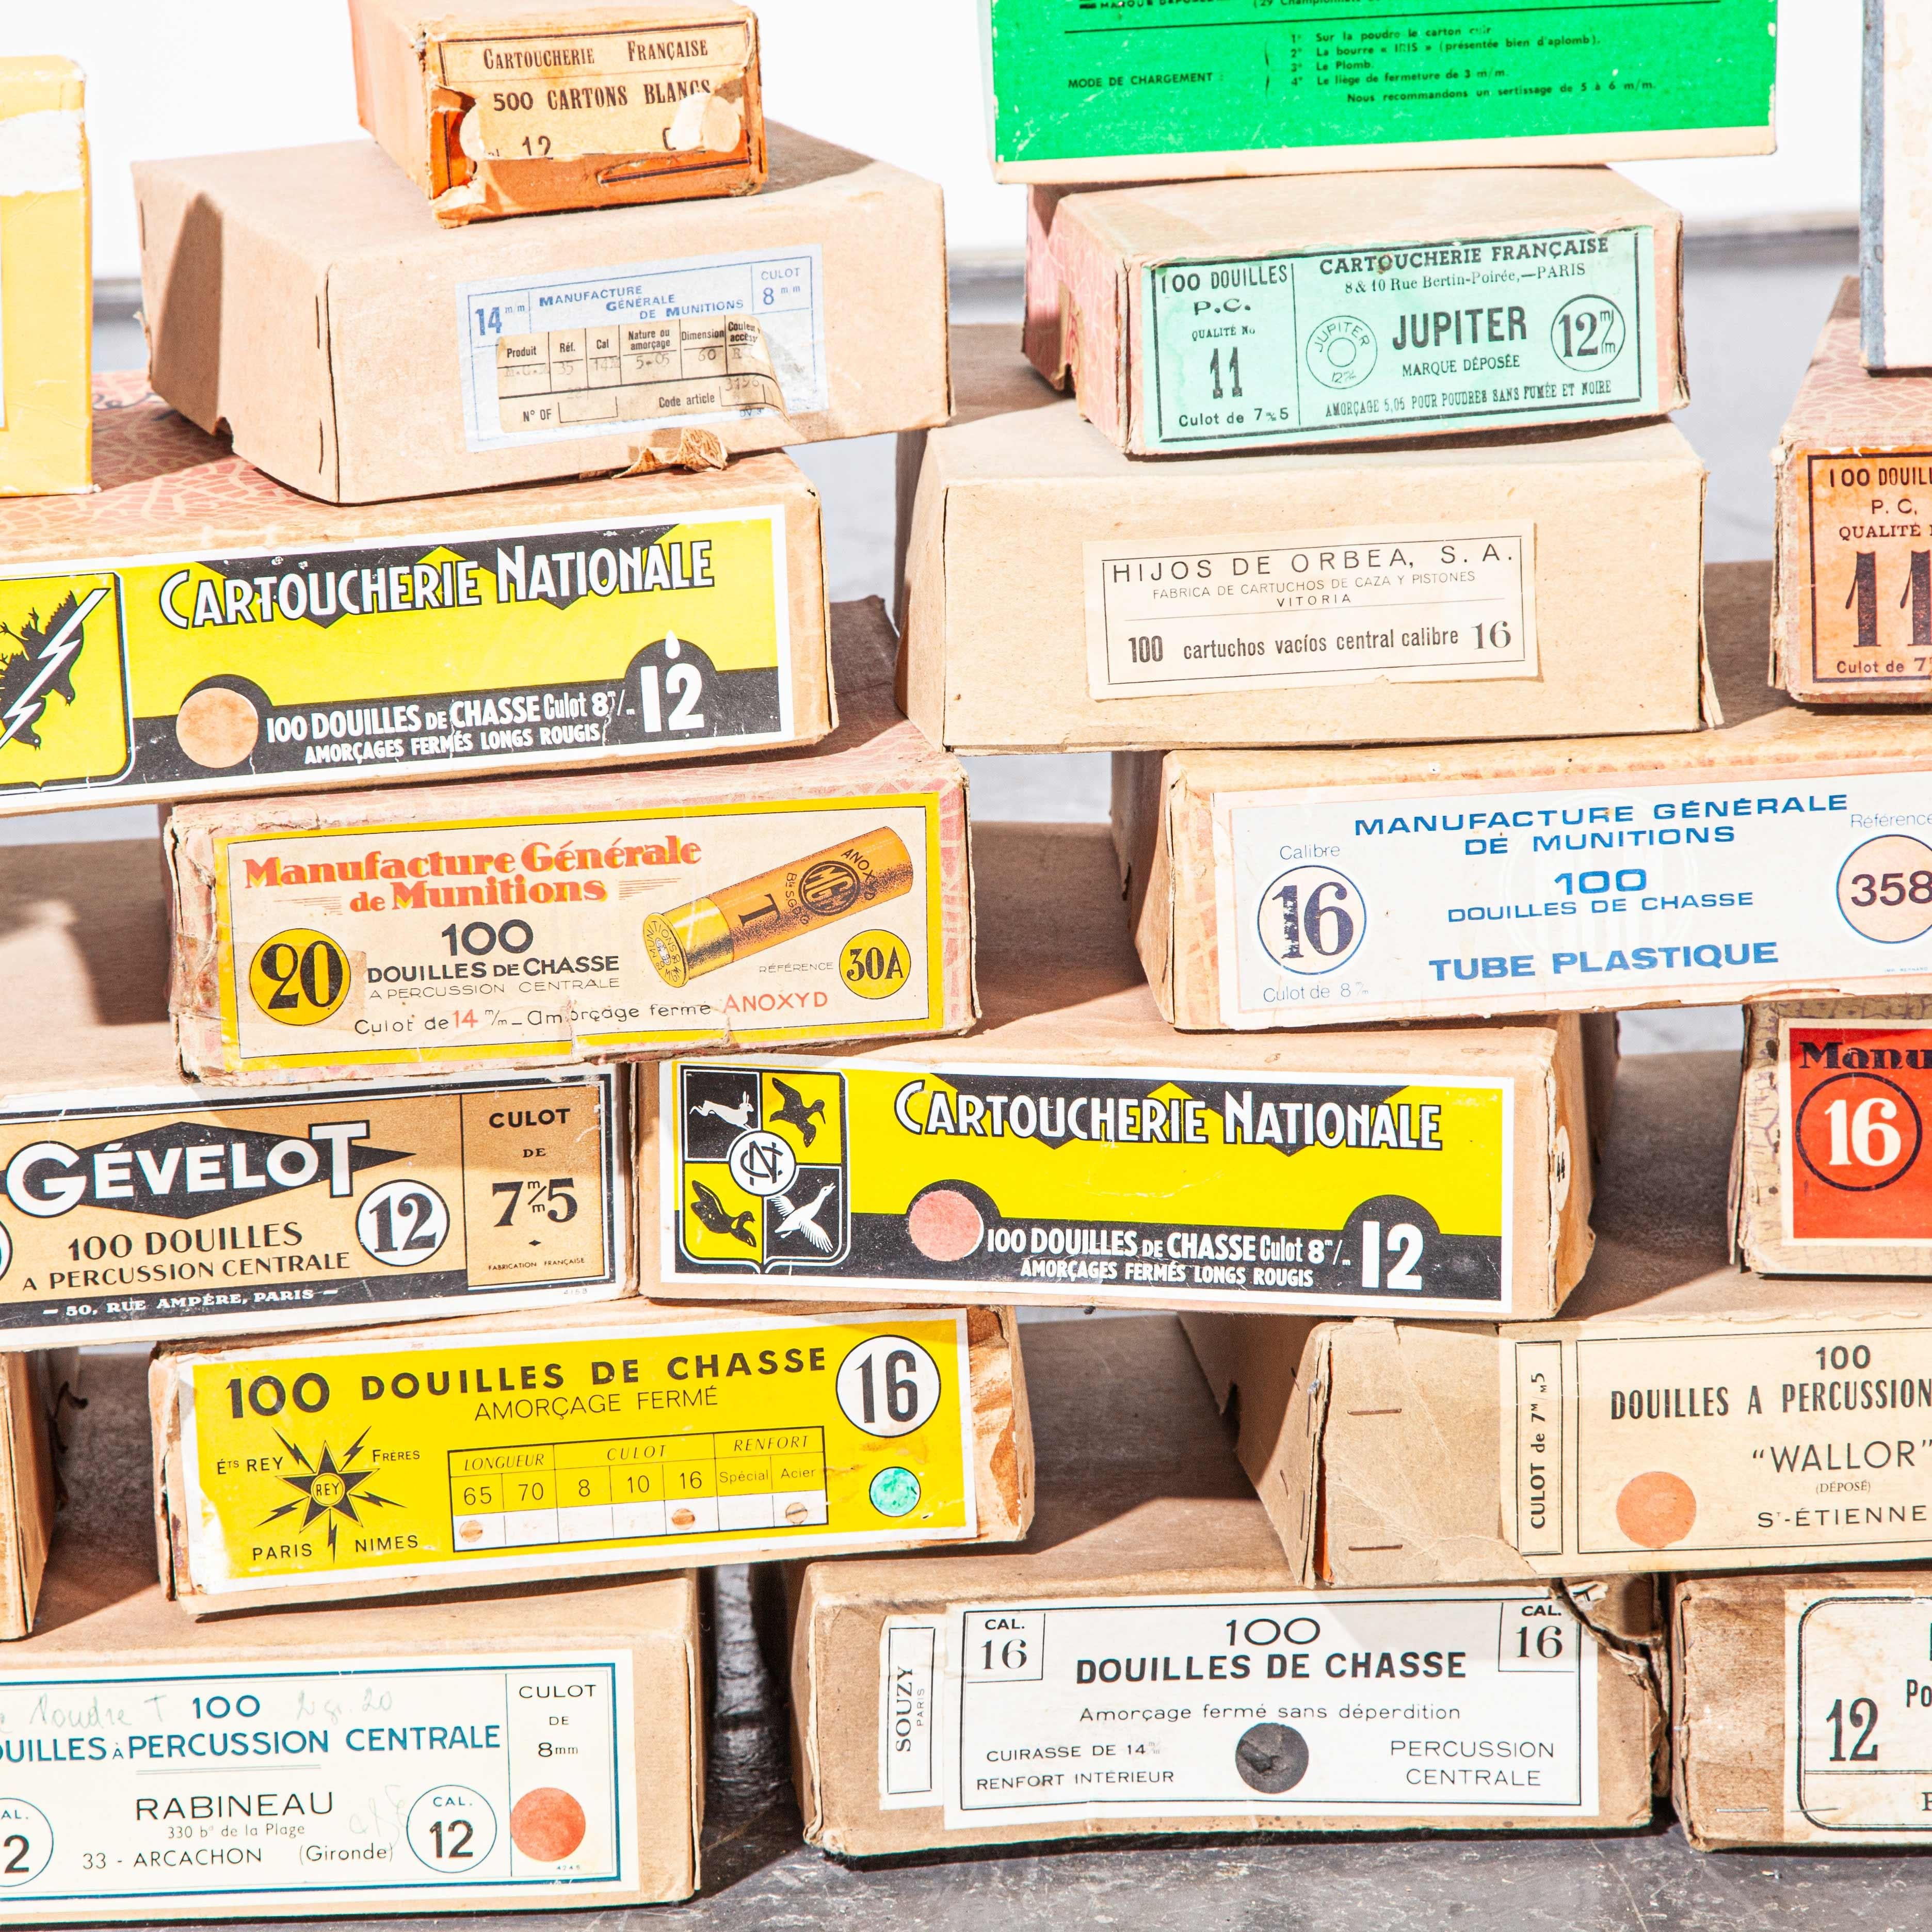 Collection of French vintage gun cartridge boxes
Collection of French vintage gun cartridge boxes. Dating mainly from the late 19th-early 20th century this is a beautiful collection of very original boxes with exceptional graphics. The boxes are